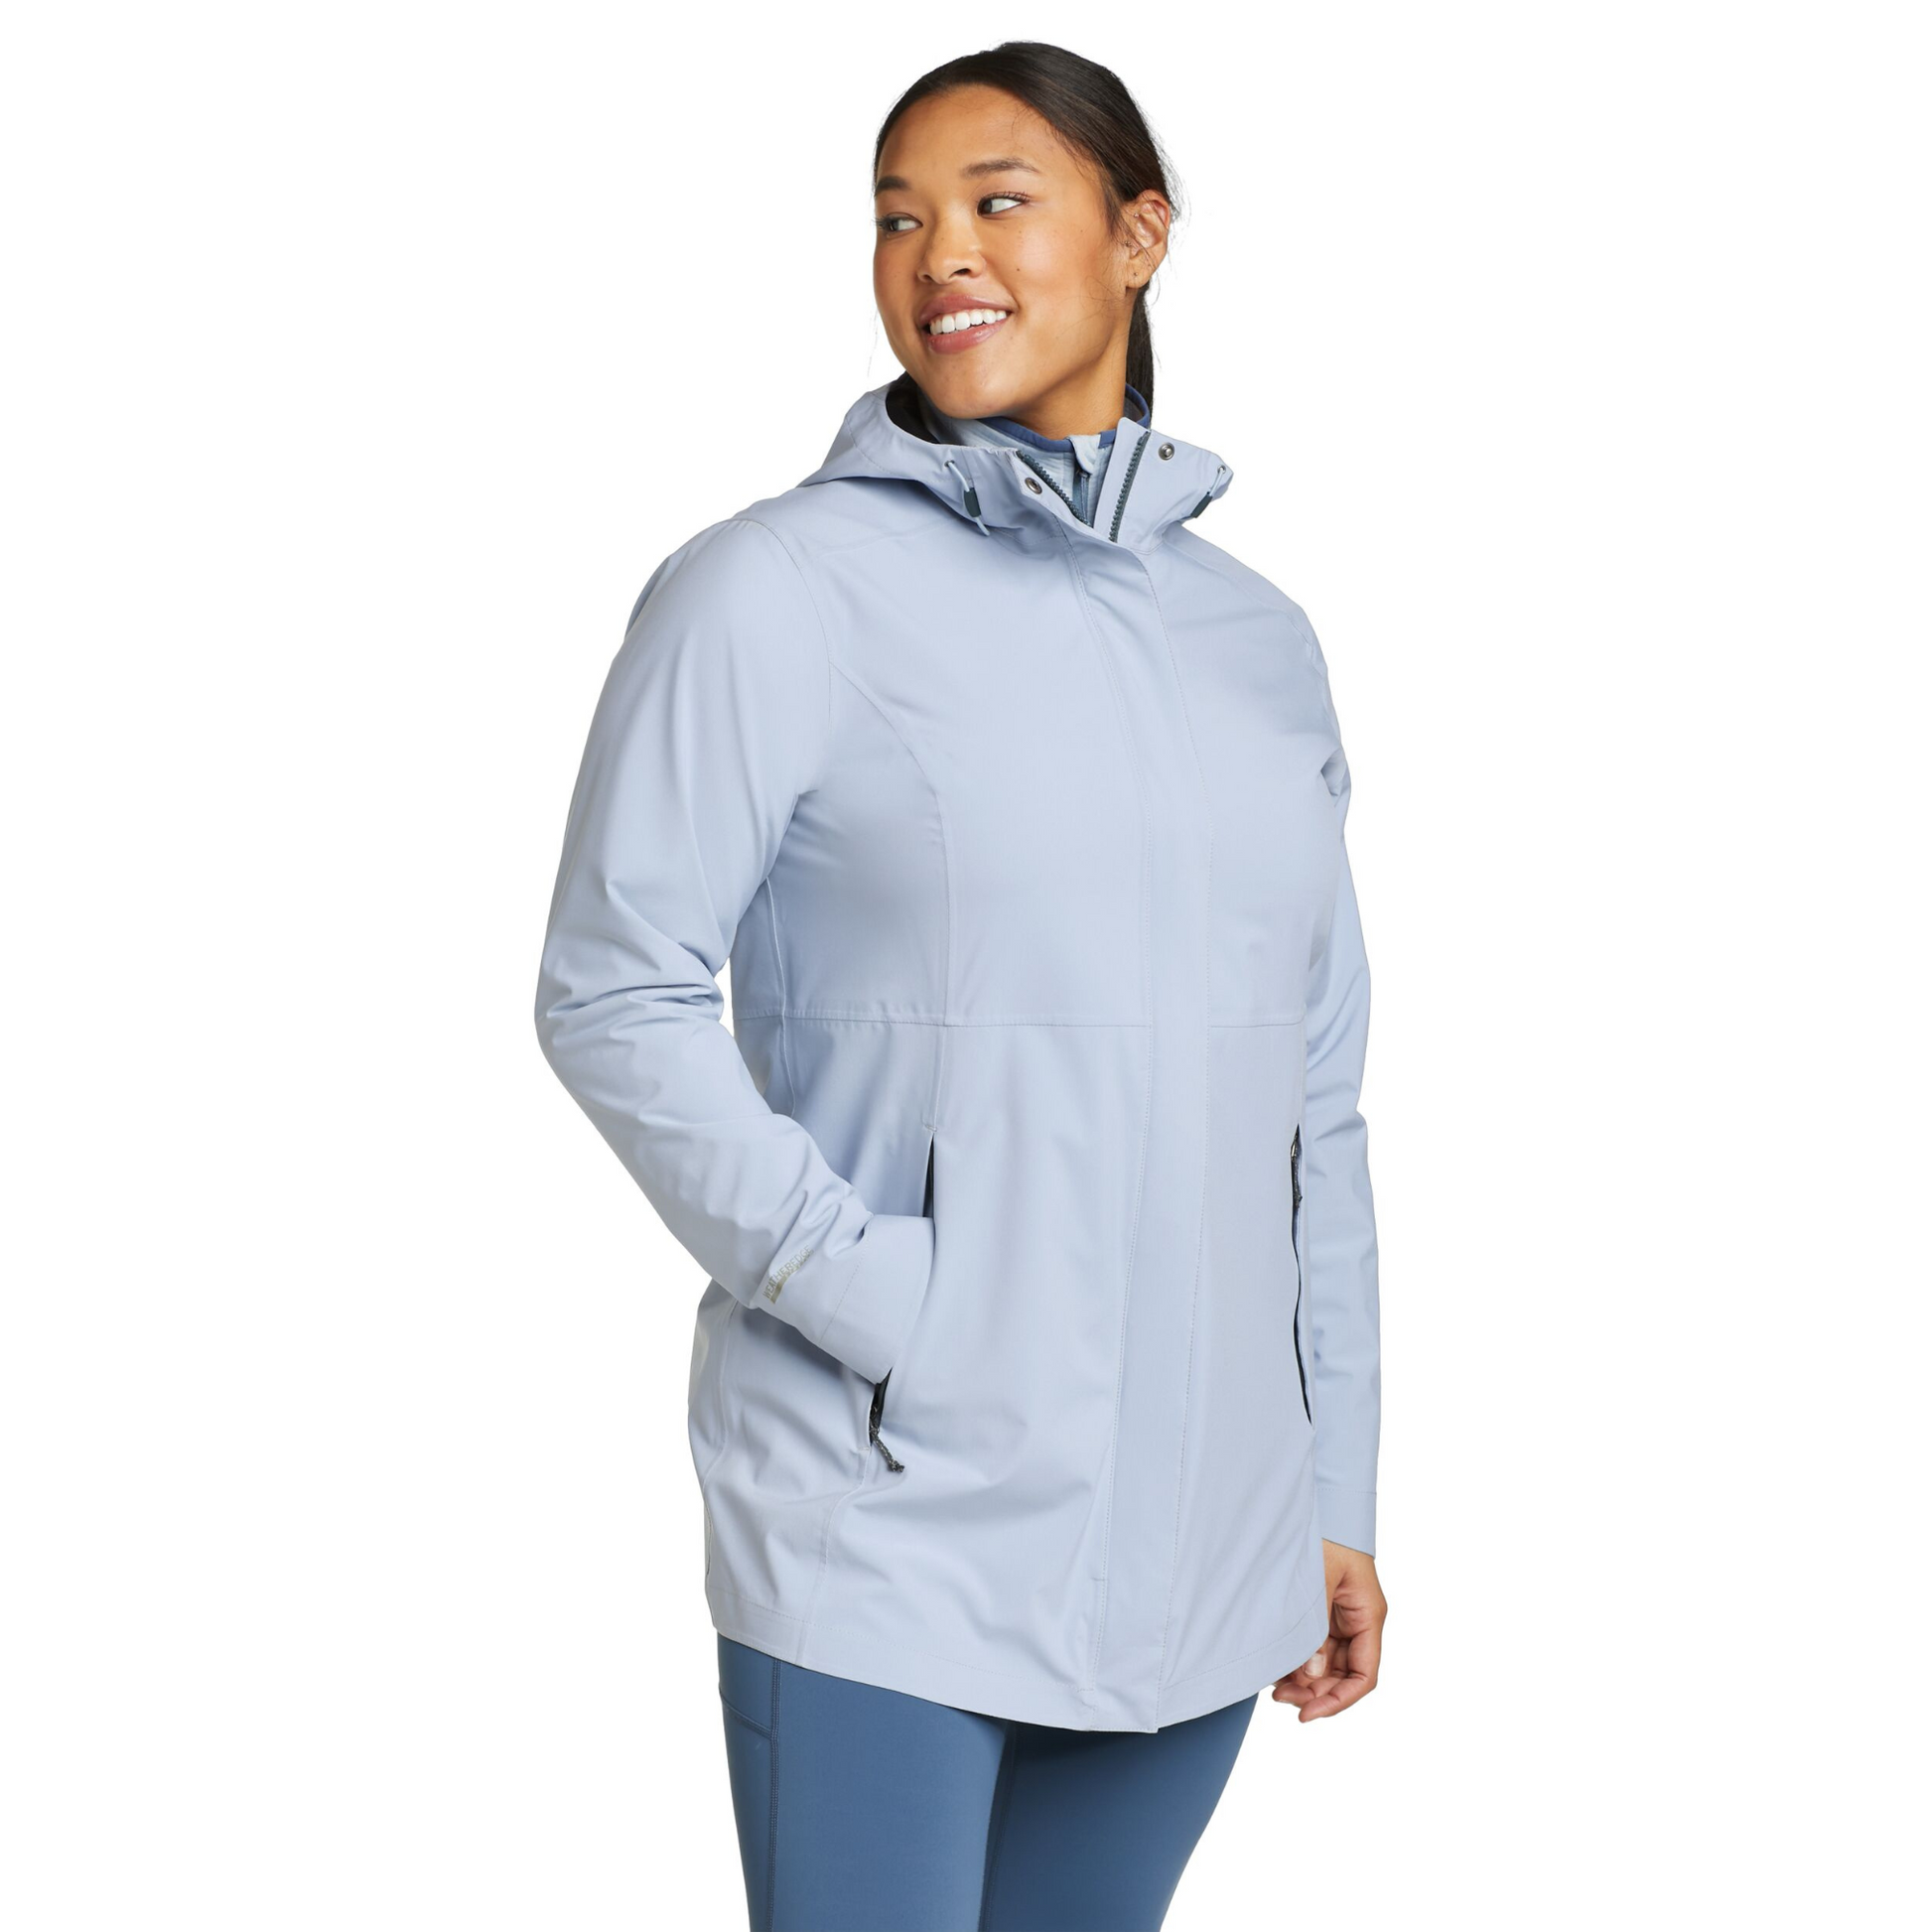 Chaqueta Mujer Cloud Cap 2.0 Eddie Bauer Impermeable Azul | Outdoor Adventure Colombia